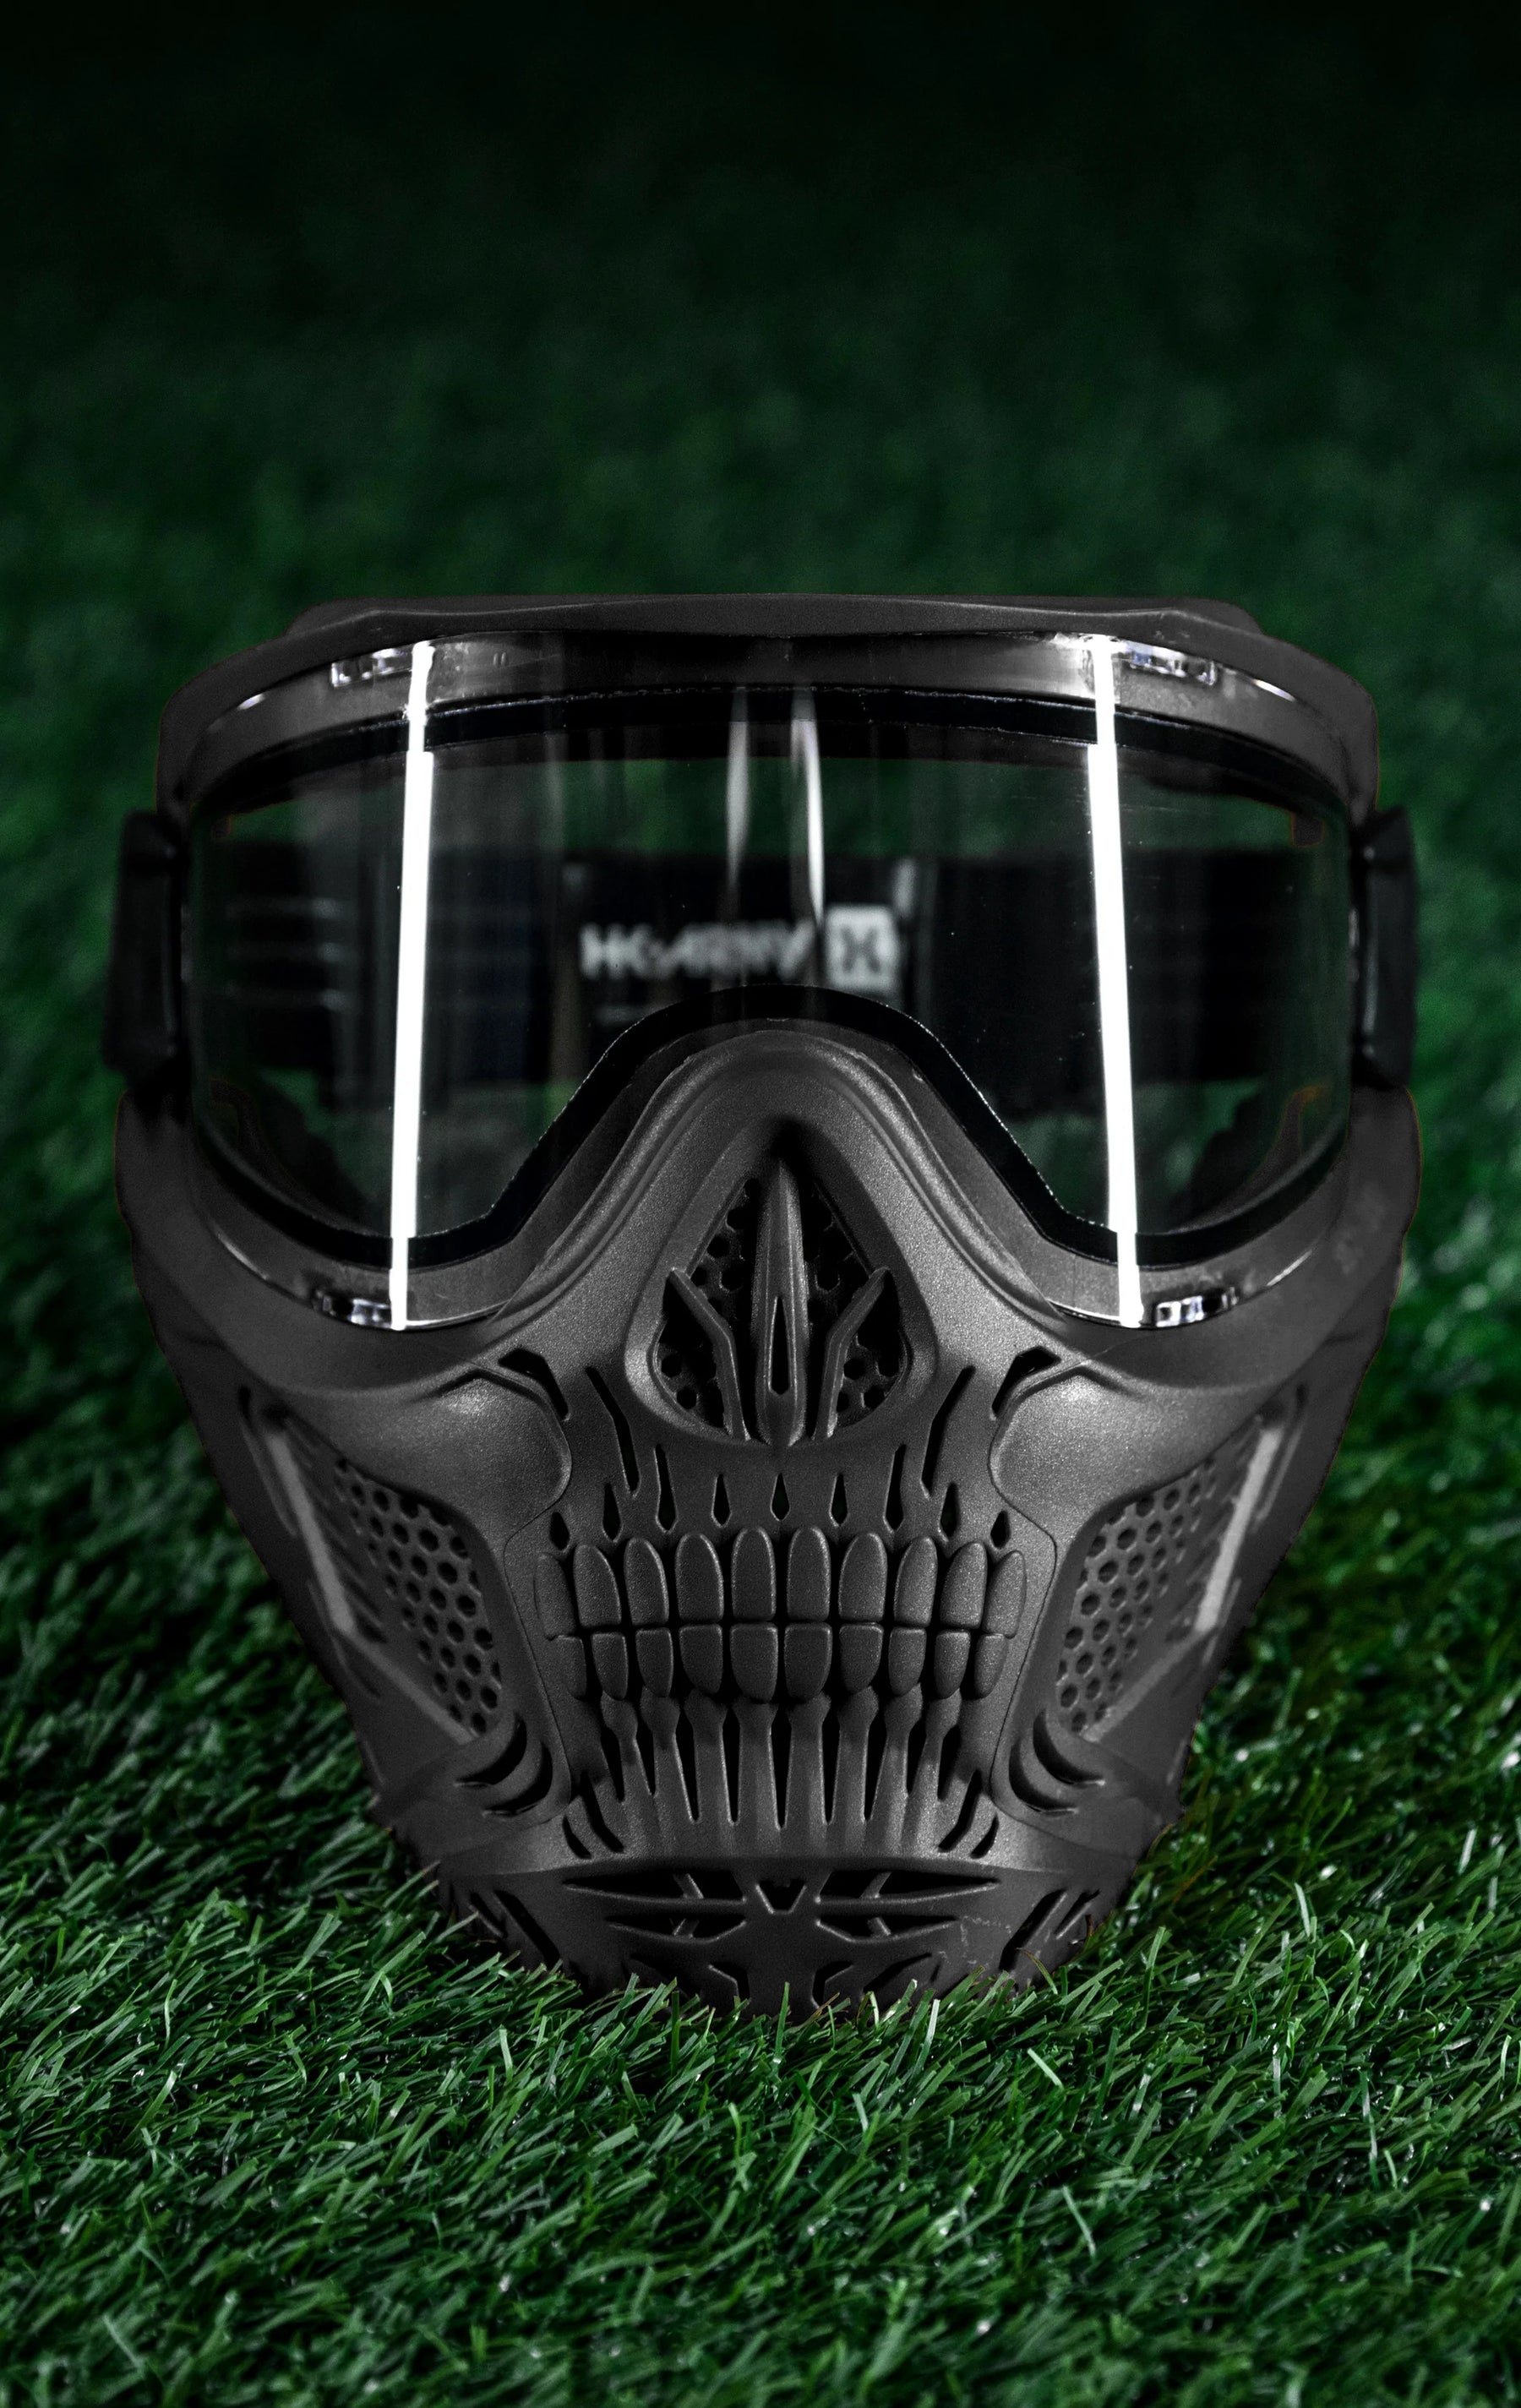 Hstl Skull Goggle - Black W/ Clear Lens | Paintball Goggle | Mask | Hk Army